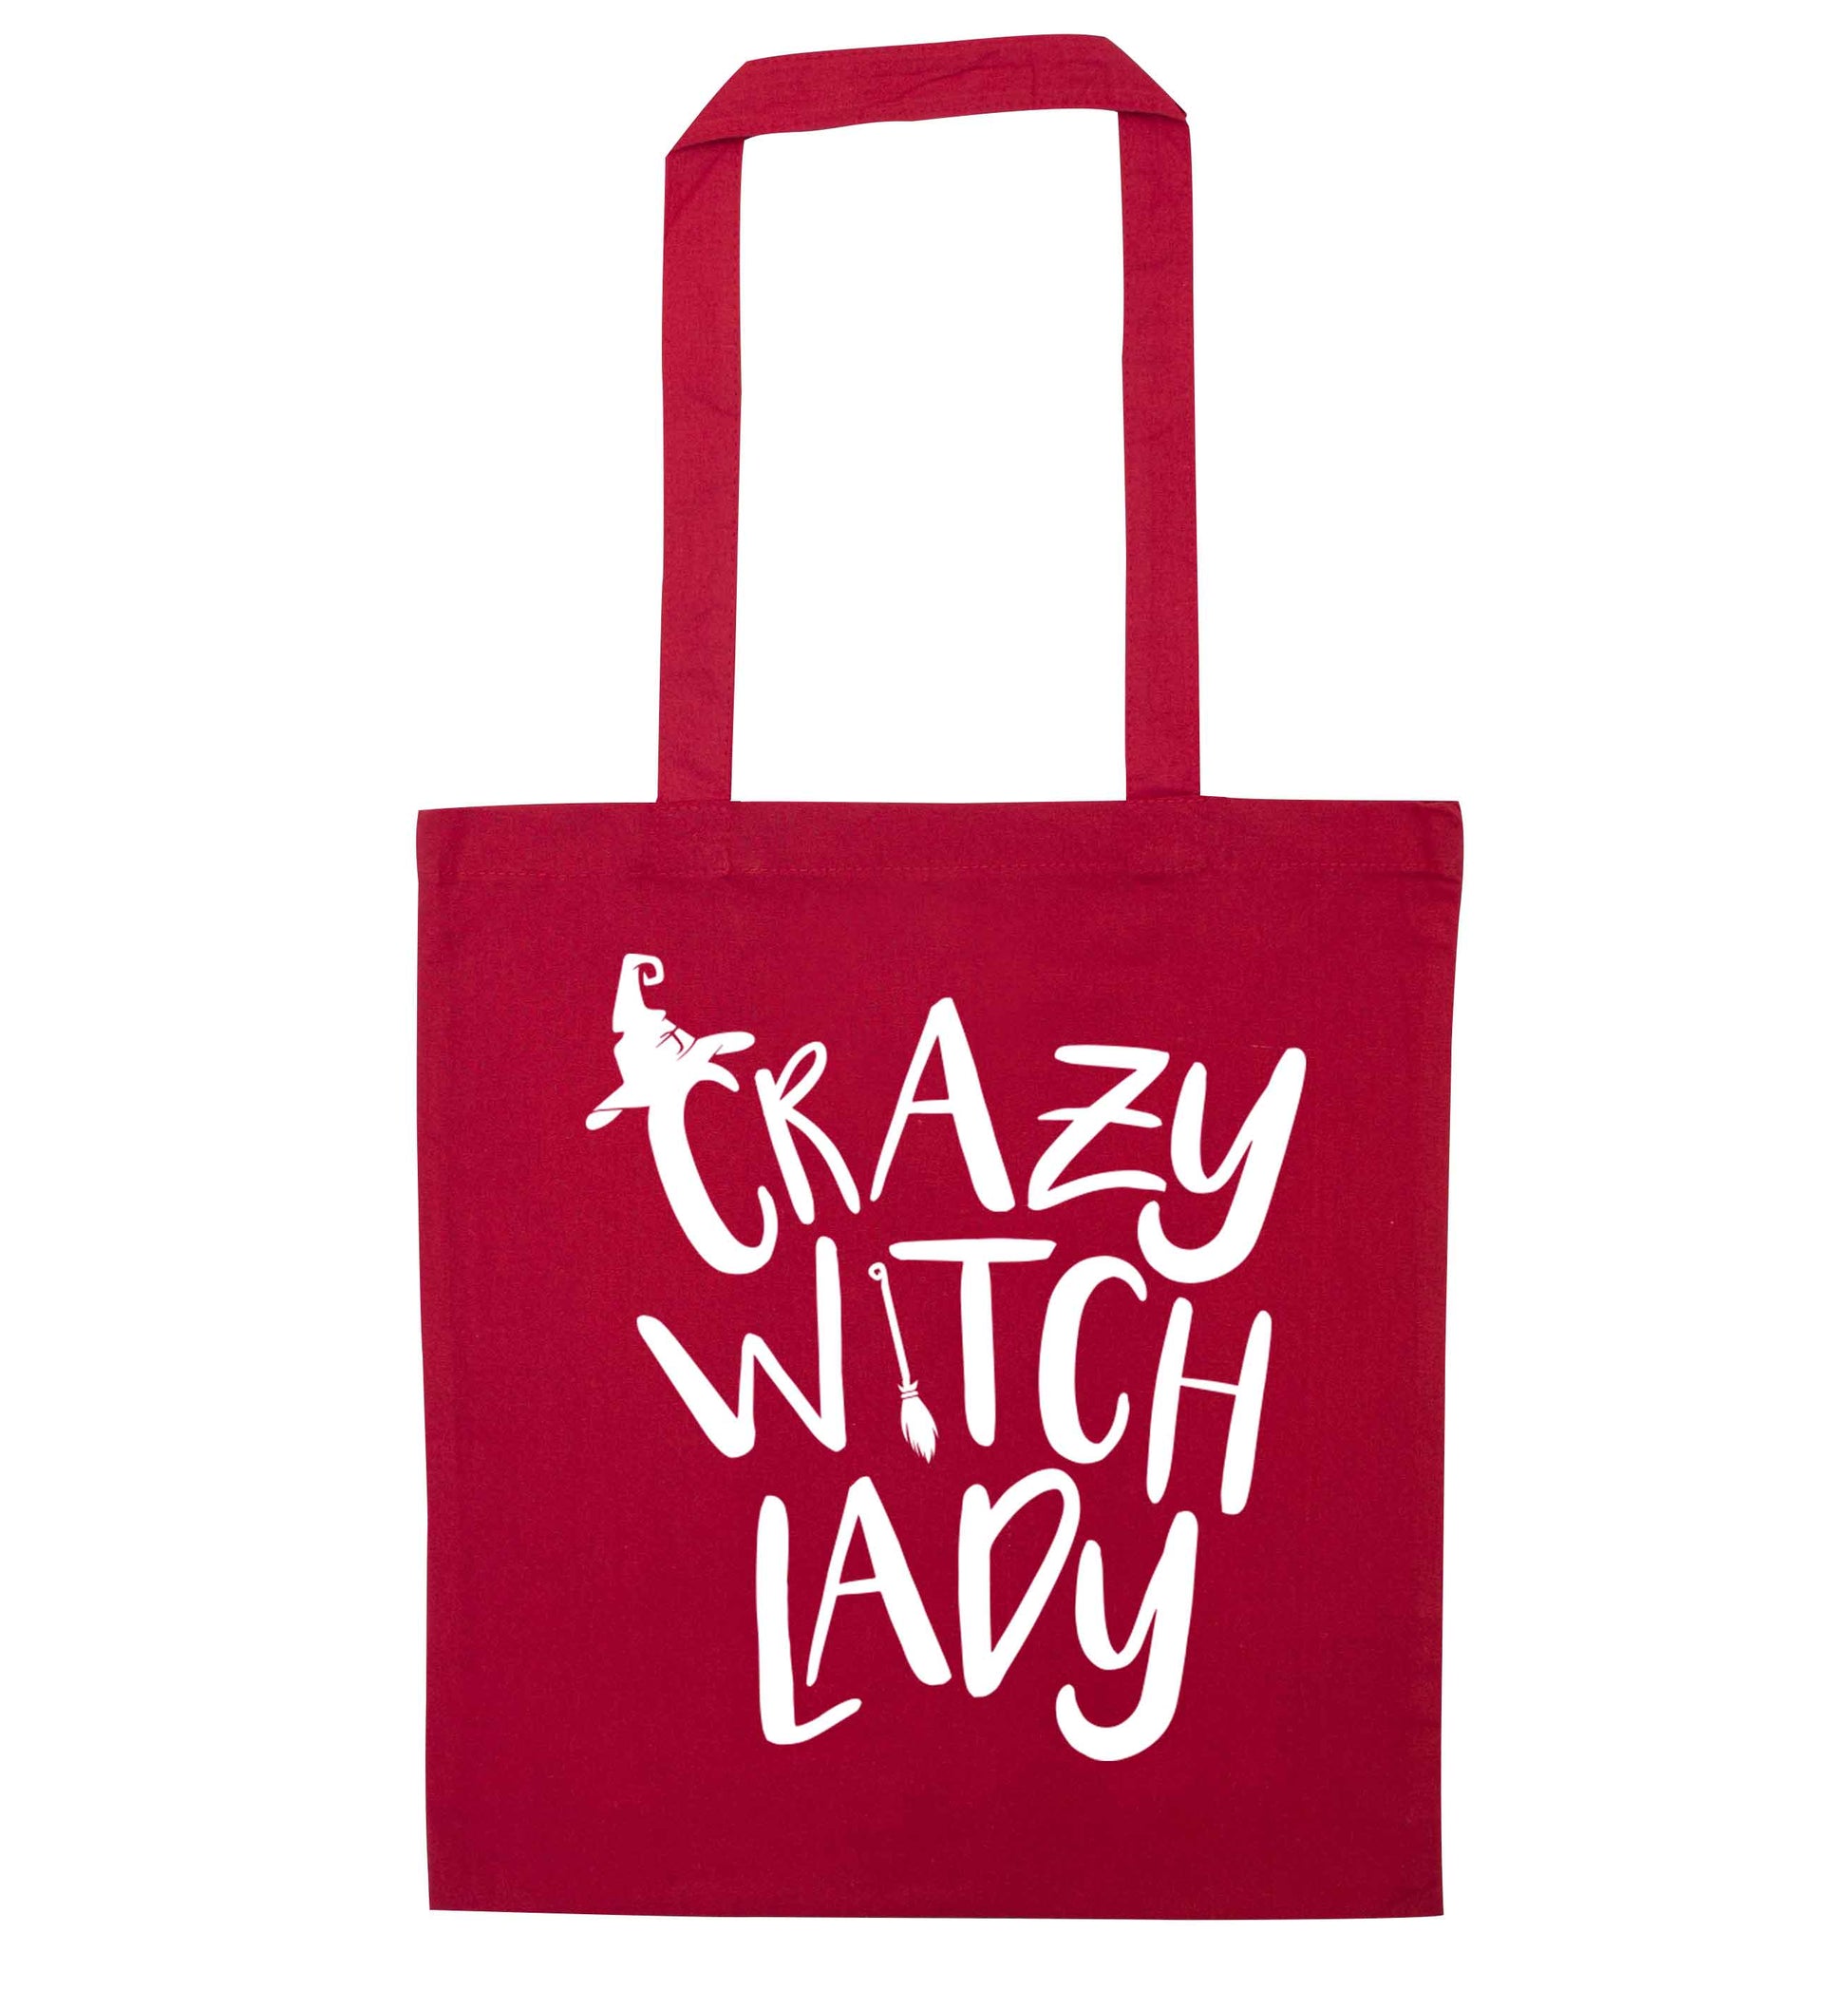 Crazy witch lady red tote bag